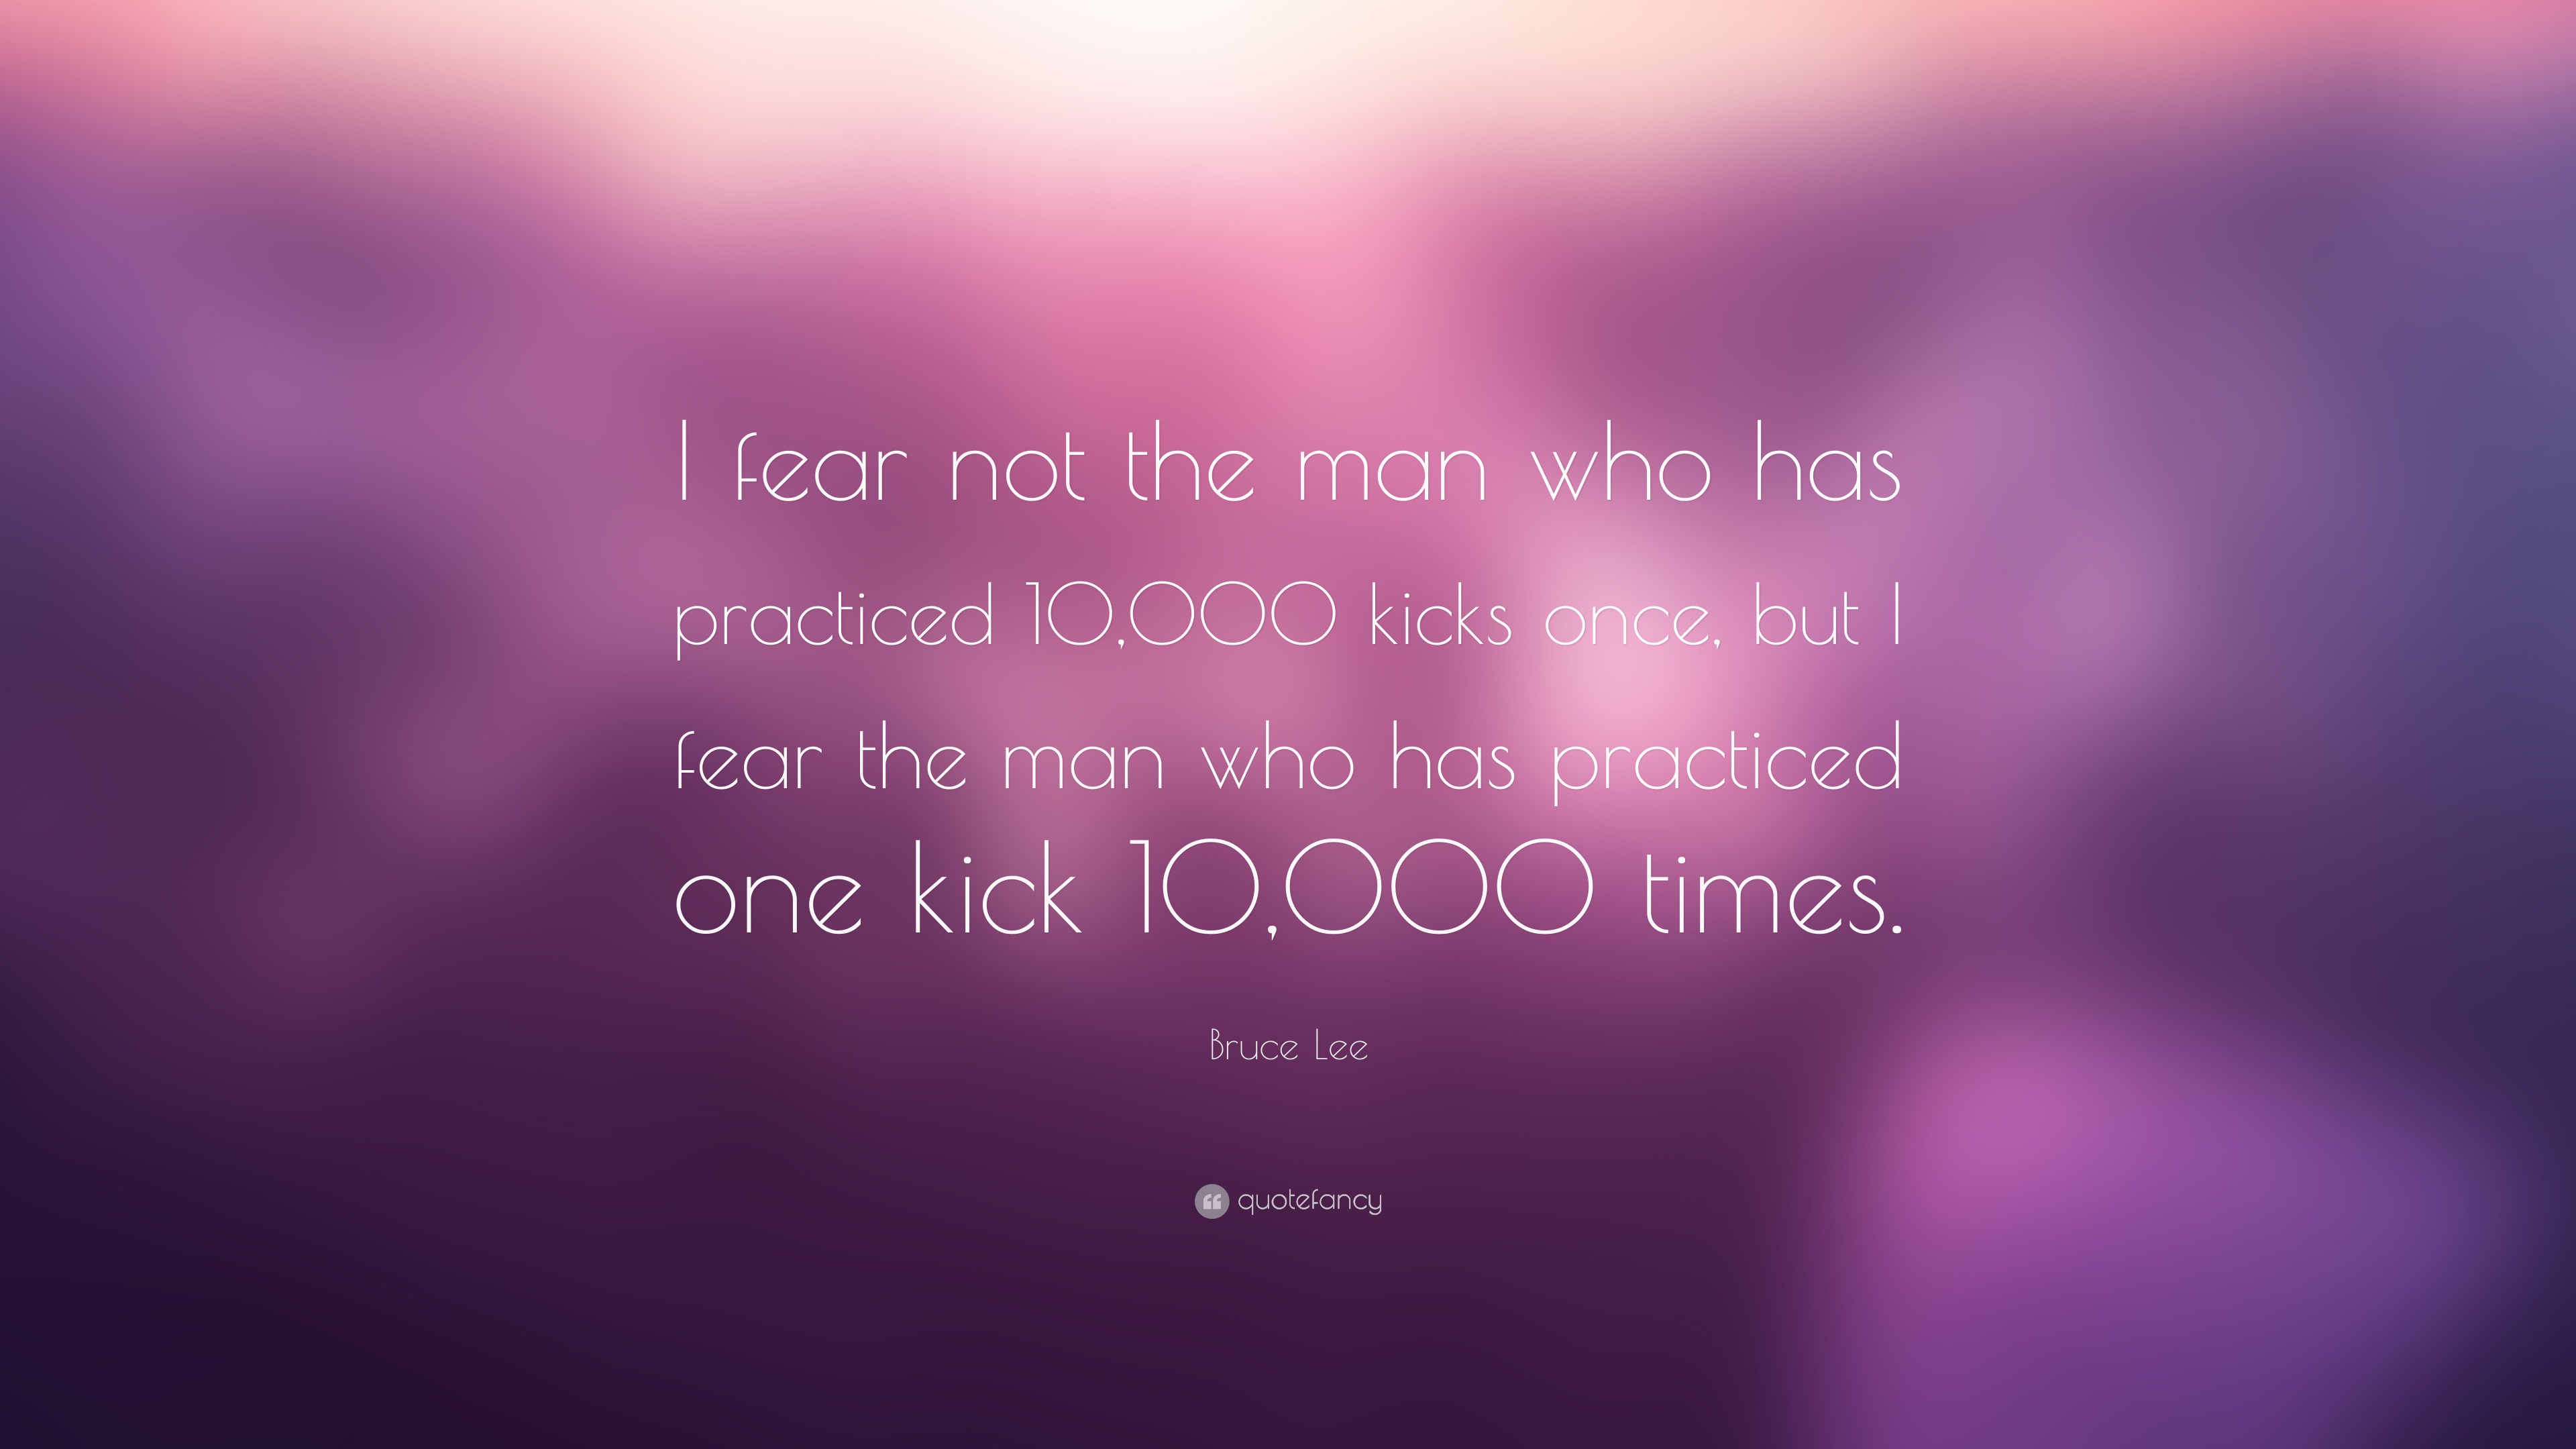 Bruce Lee Quote “I fear not the man who has practiced